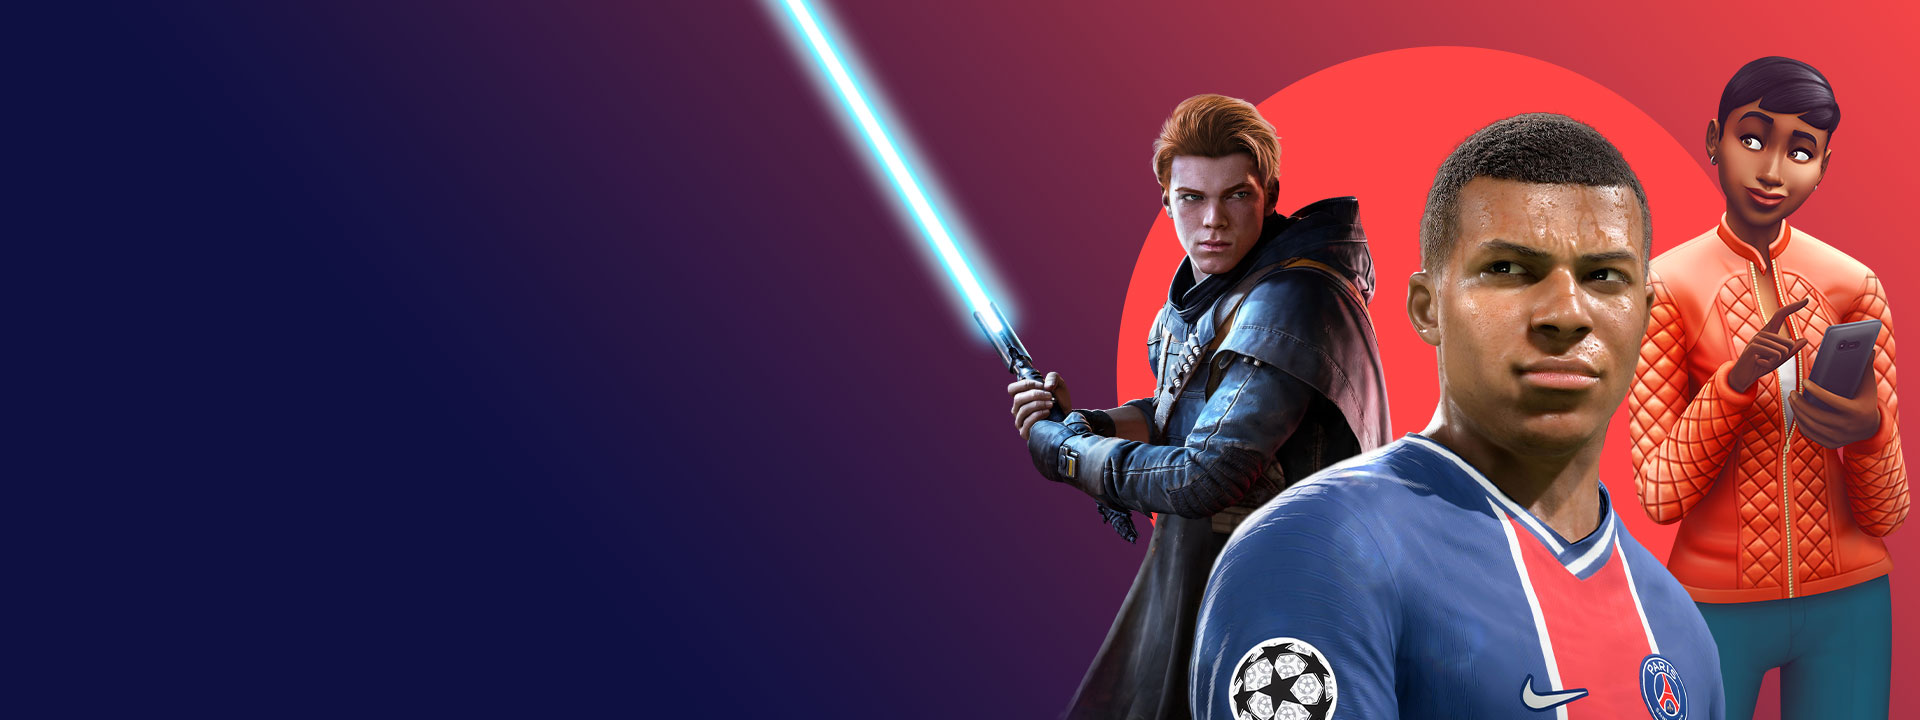 Artwork from EA games included with Xbox Game Pass, including Star Wars Jedi: Fallen Order, FIFA 22 and The Sims 4.